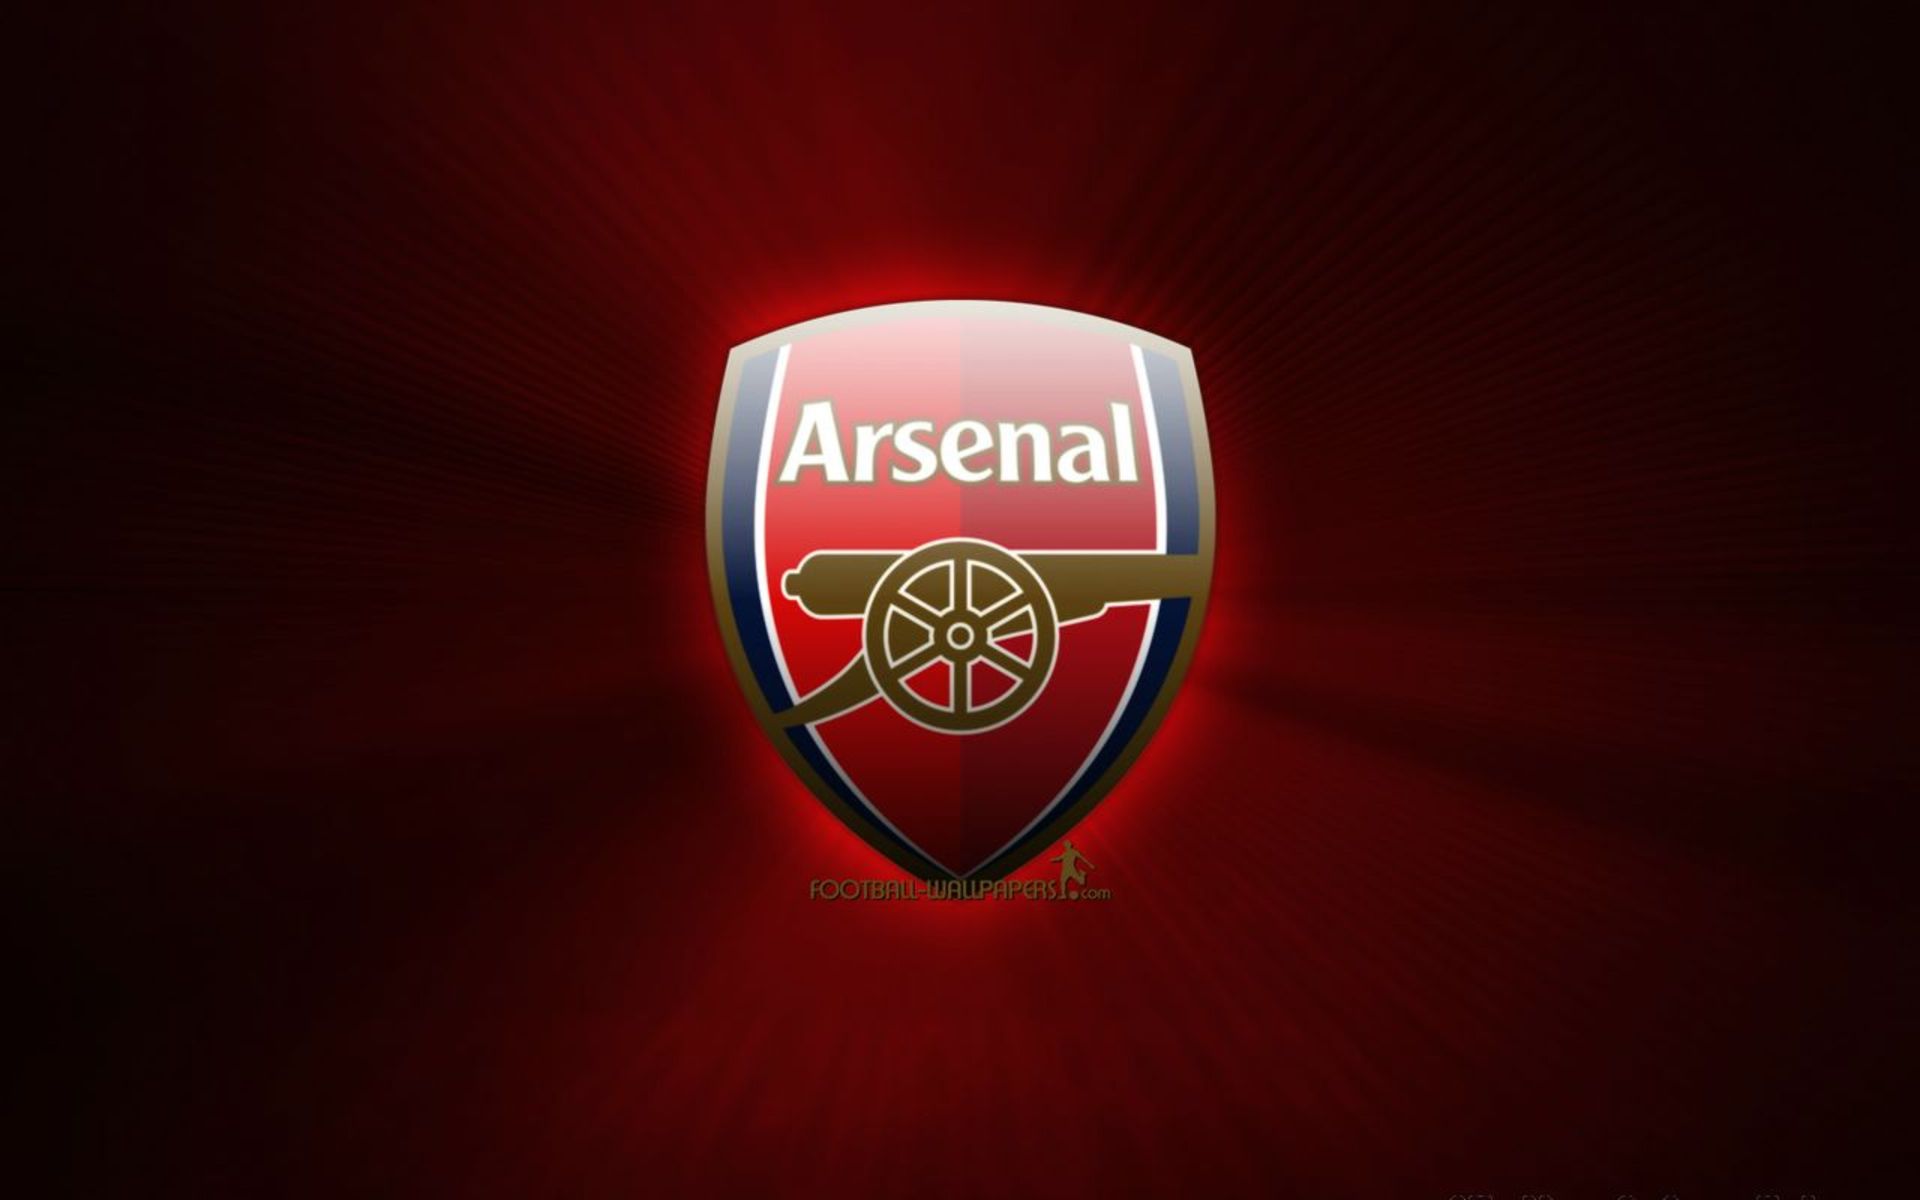 Arsenal Fc Wallpaper And Windows 10 Theme All For Windows 10 Free